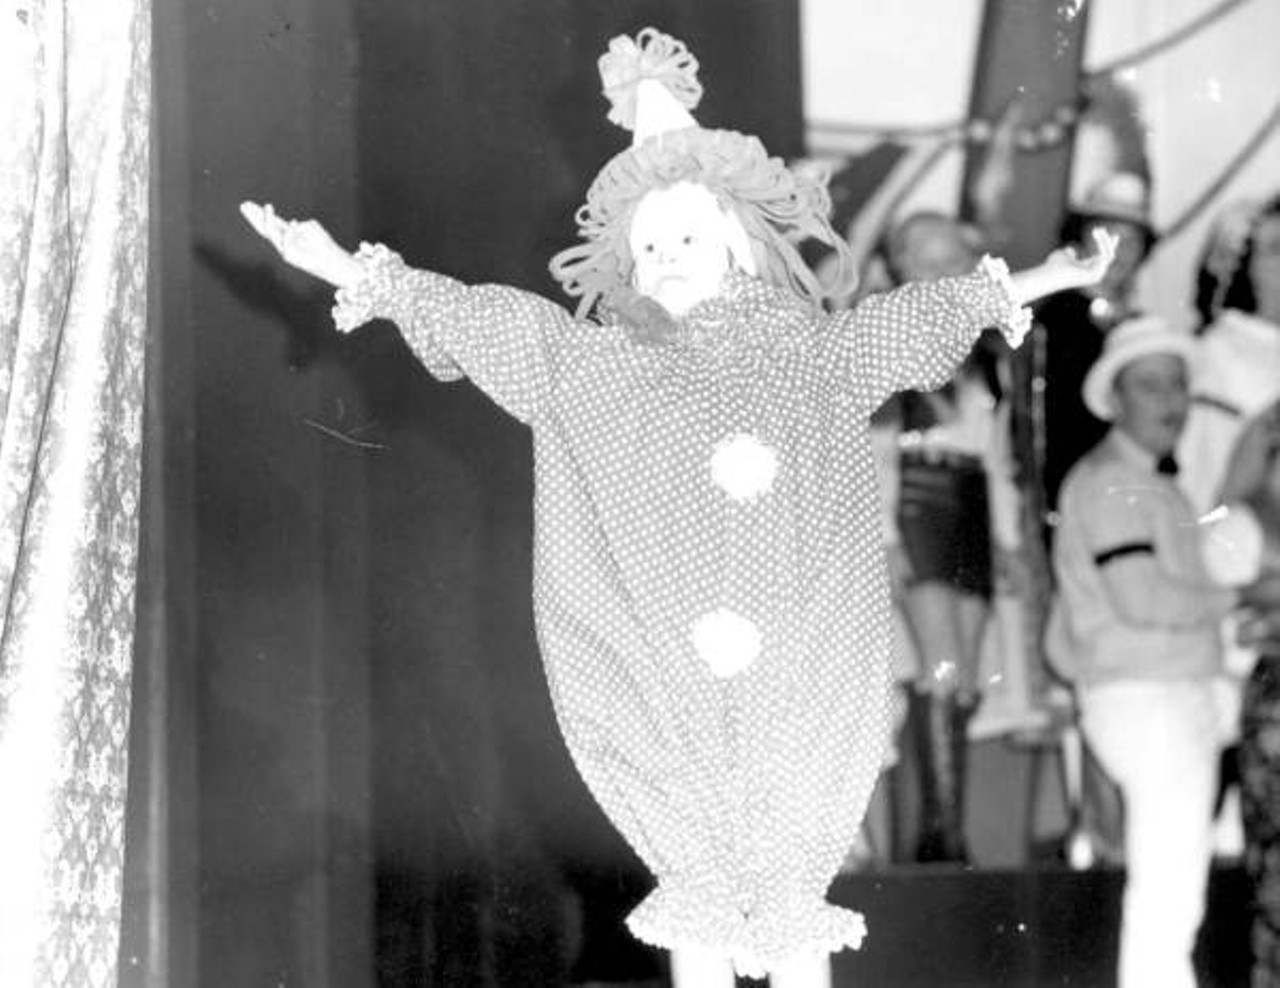 From a clown performance at the Fort Meyers Pageant of Light in 1972 (via floridamemory.com)